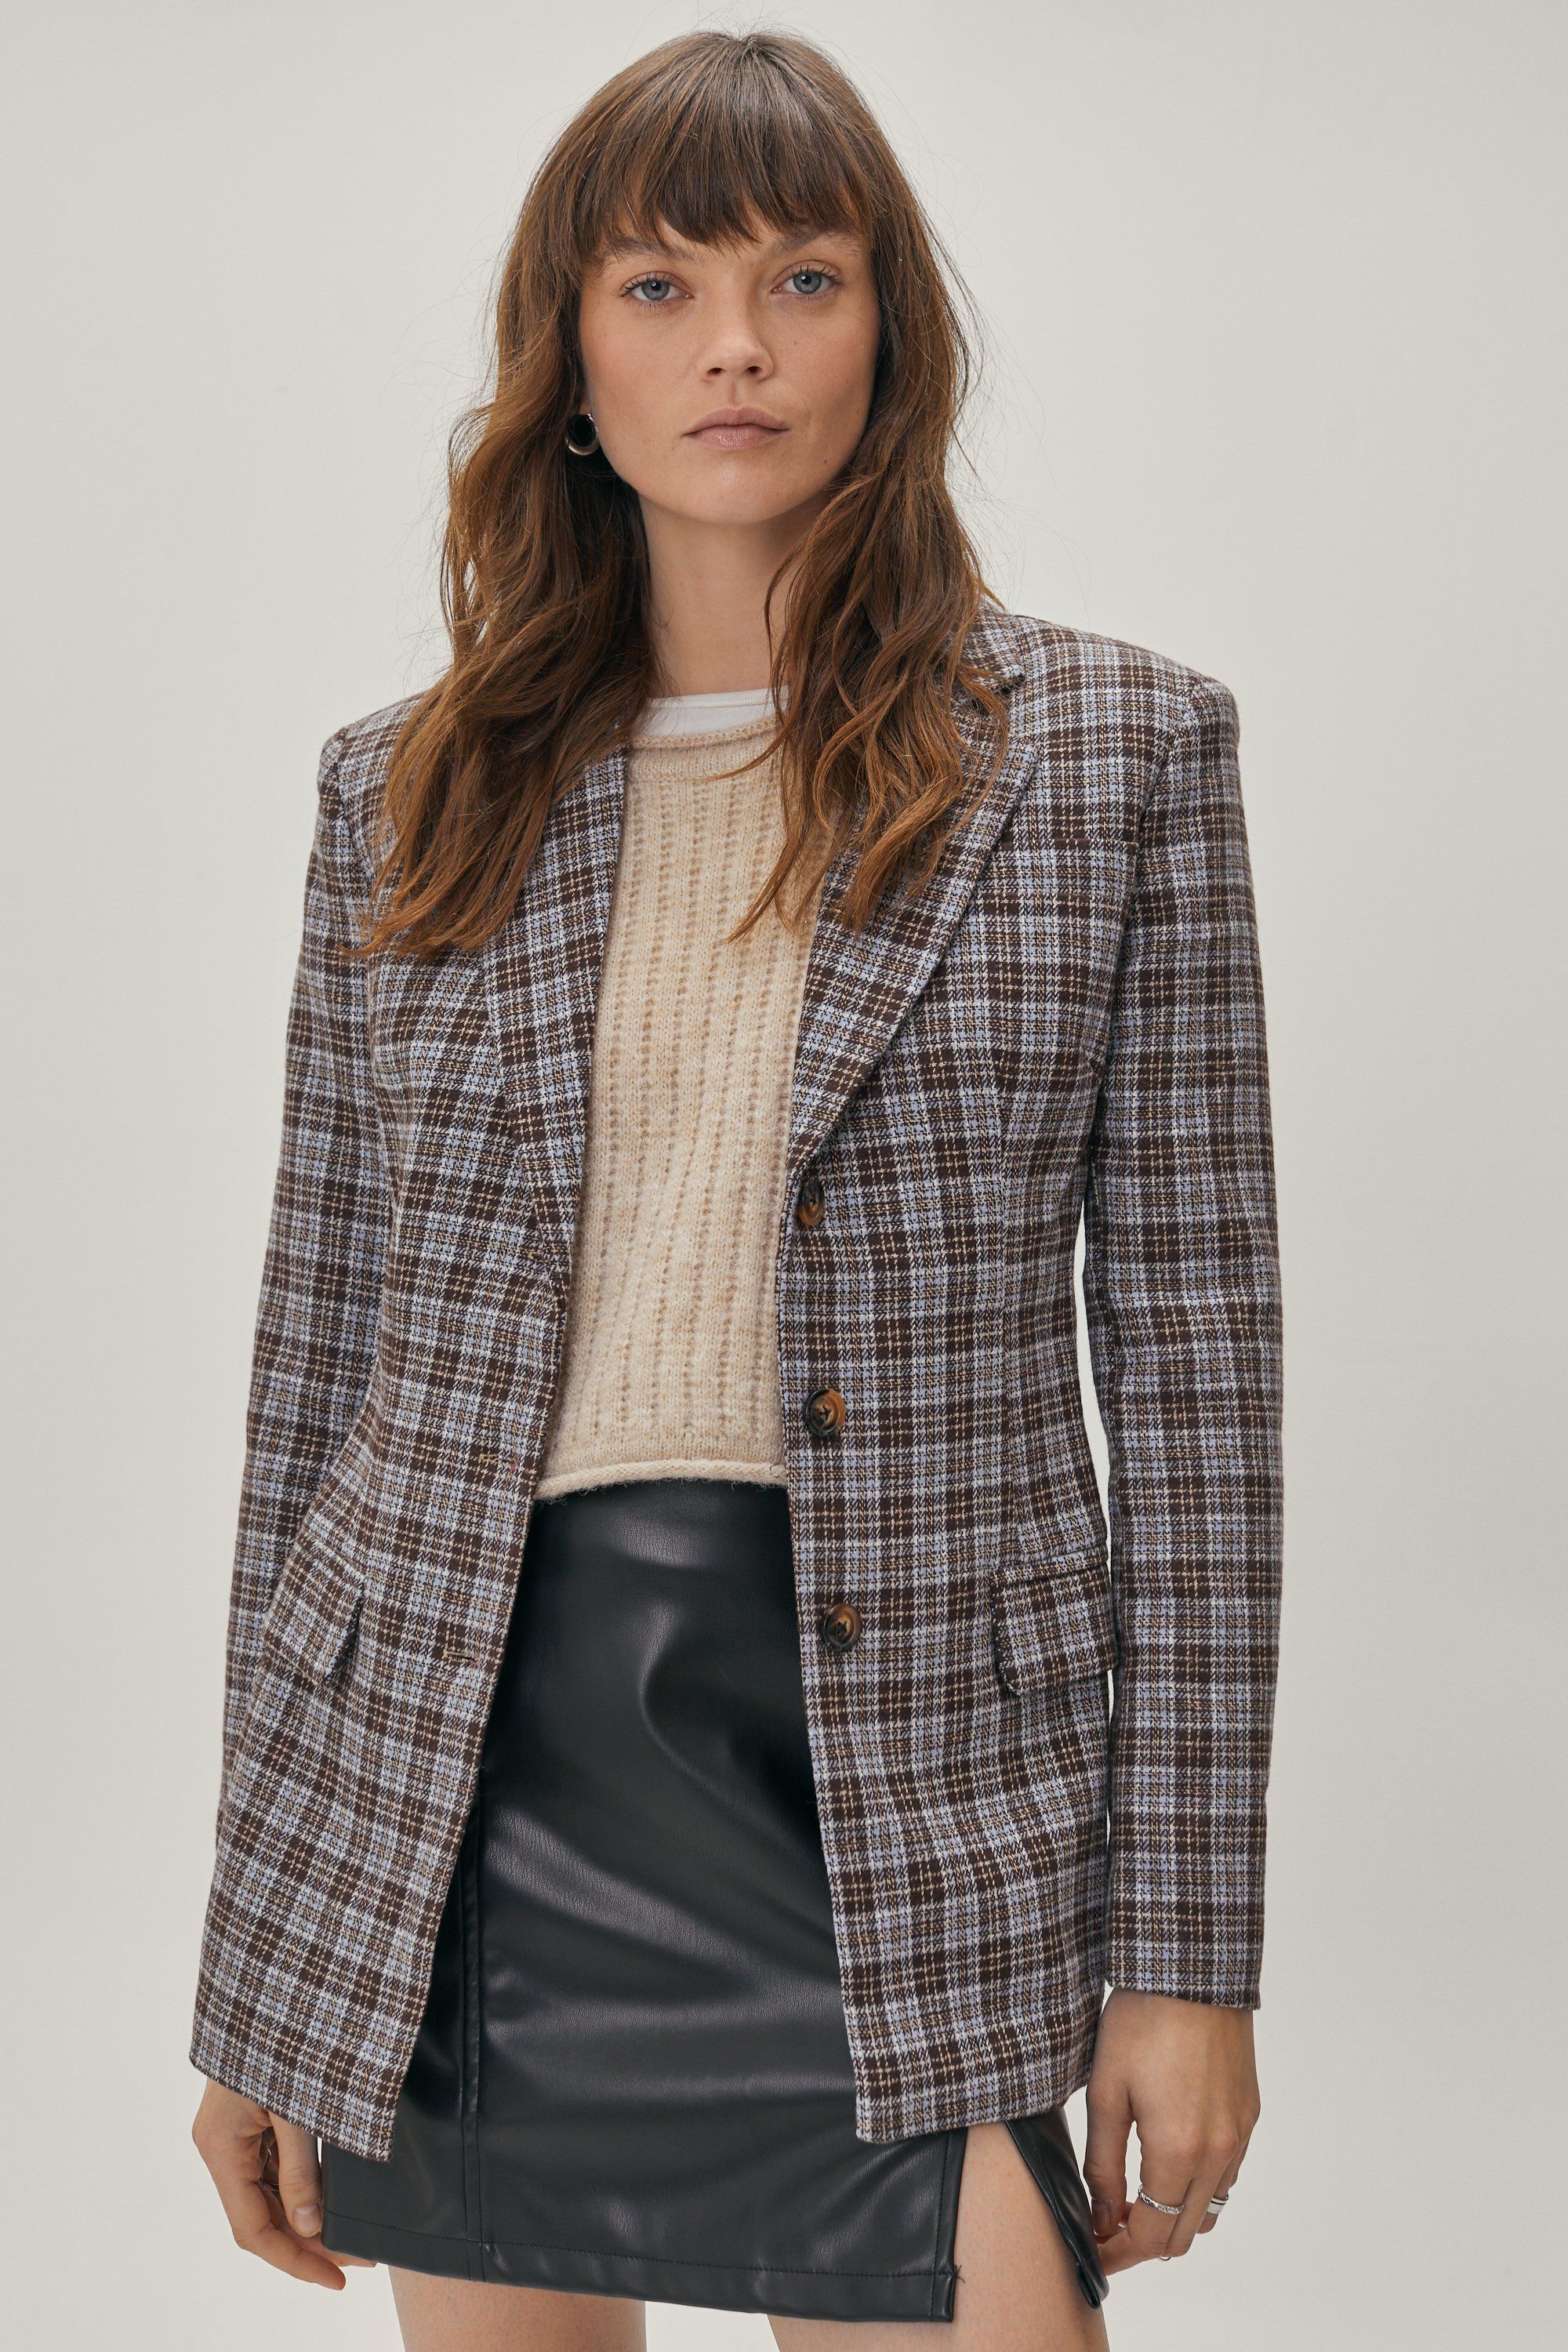 25 Chic Blazer Outfit Ideas for Women – May the Ray